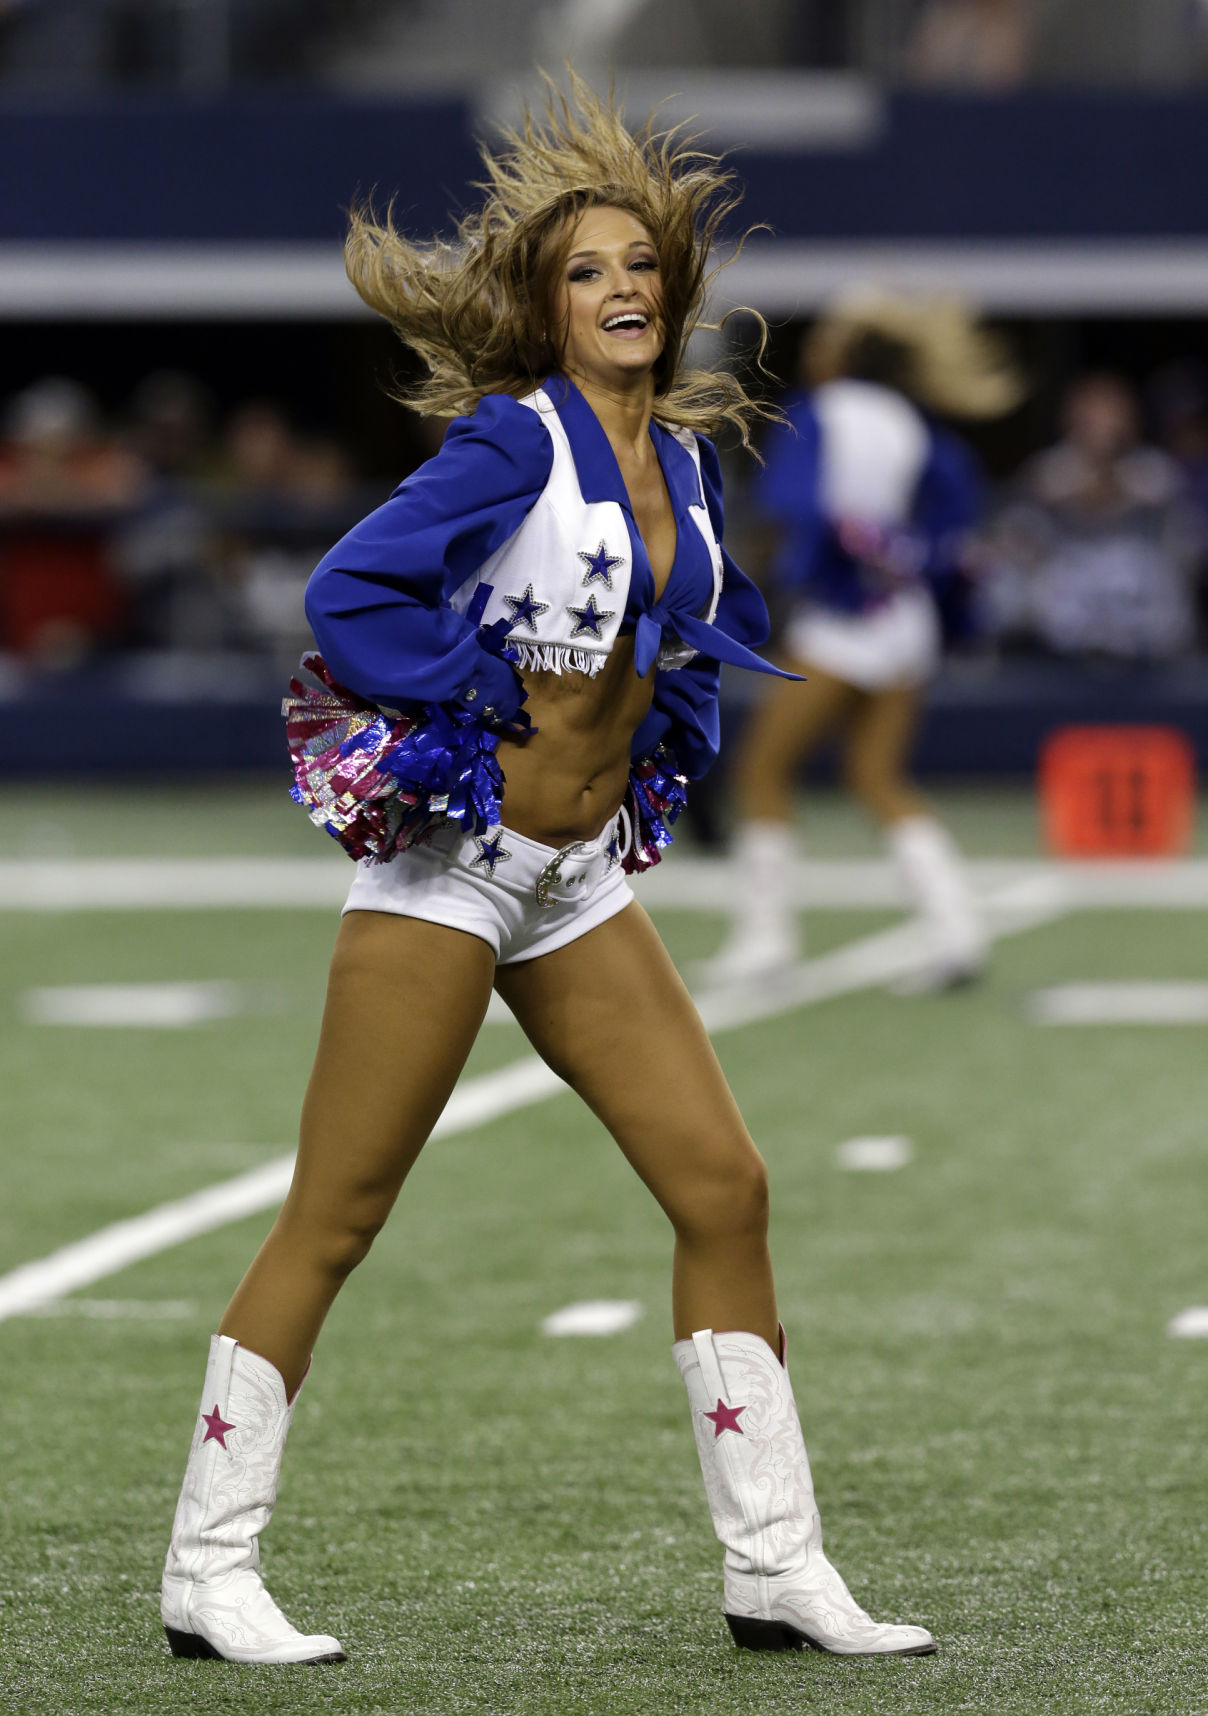 why are dallas cowboys cheerleaders not allowed to date players